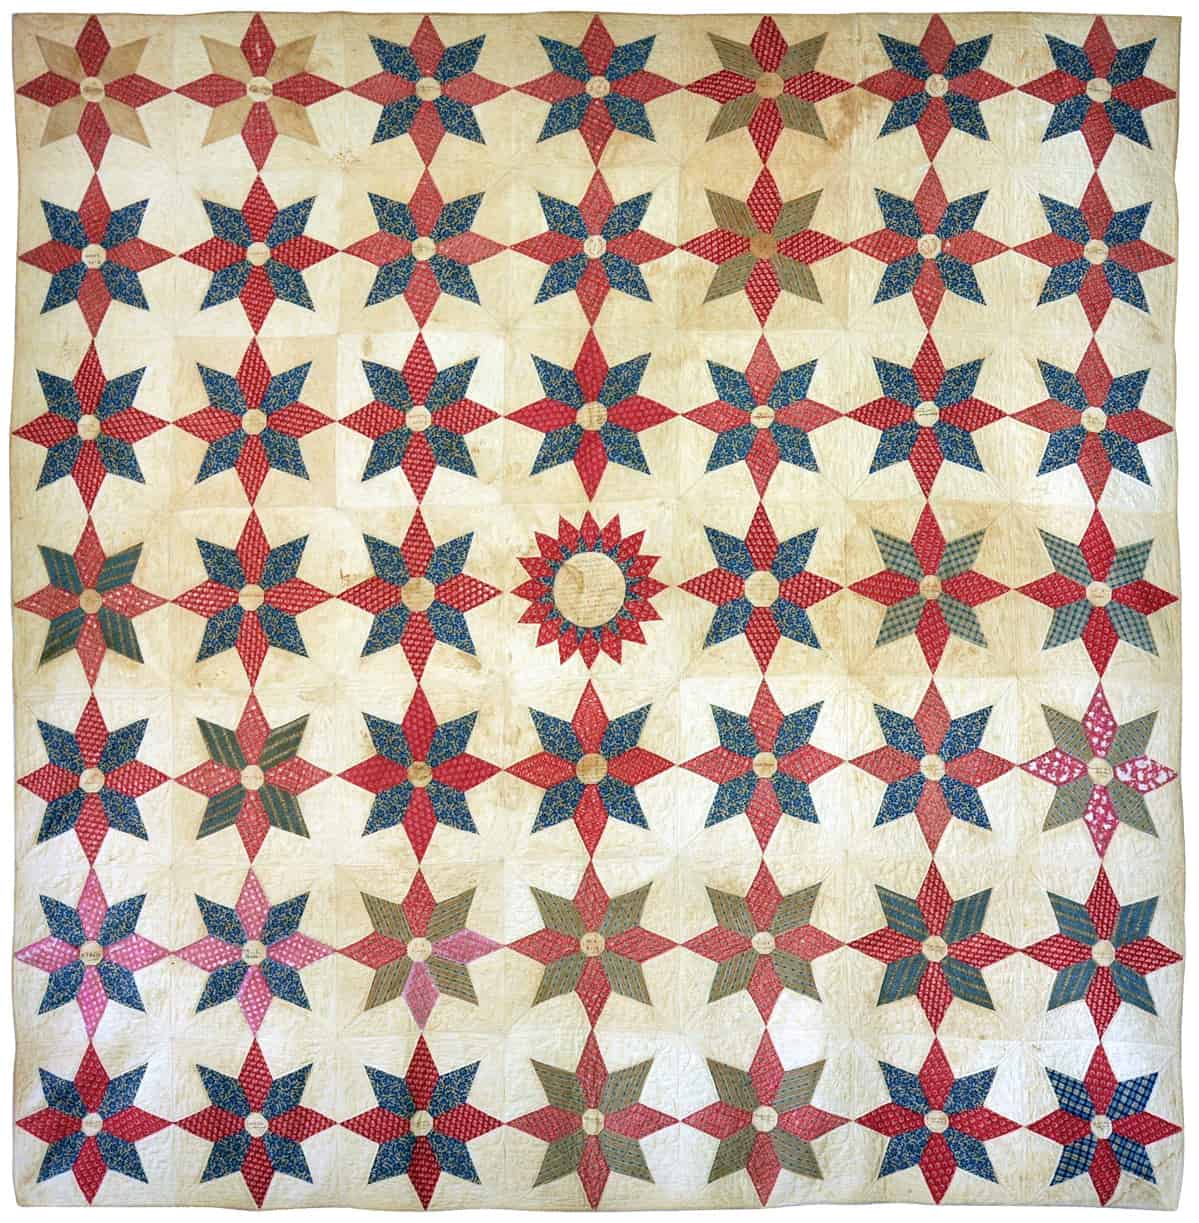 Album Quilt | Norwalk Ladies Aid Society 1847, Norwalk | Star pattern with sunflower center, red, white, gold and green cotton fabric | Signed by Ladies Aid Society | 80” x 80” | Stamford Historical Society h868ra-1